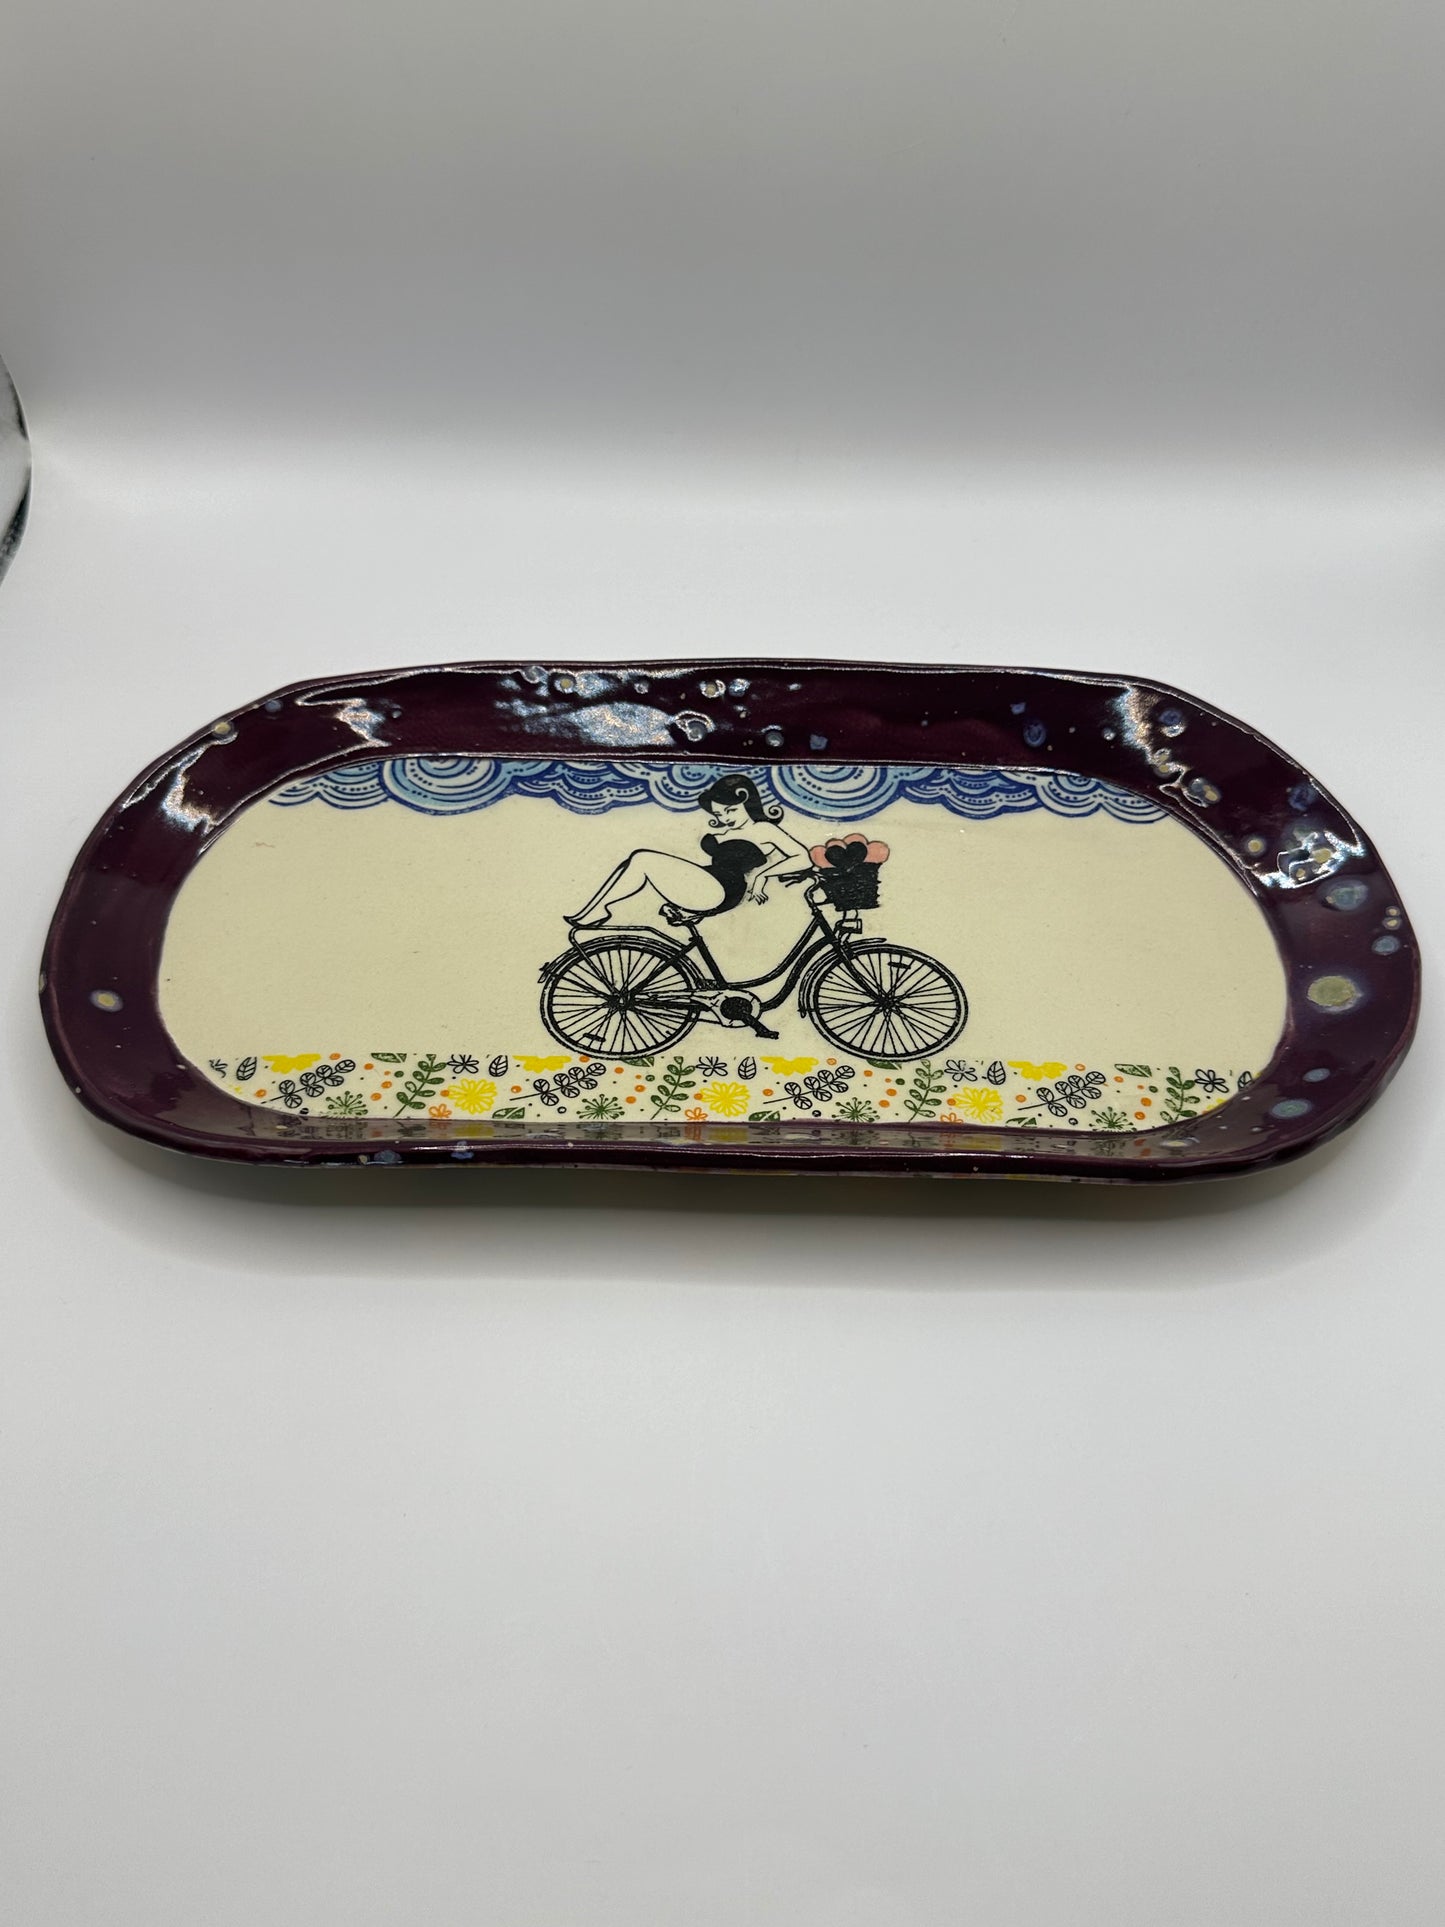 Oblong Dish - Pinup Heart Basket Bicycle (footed)